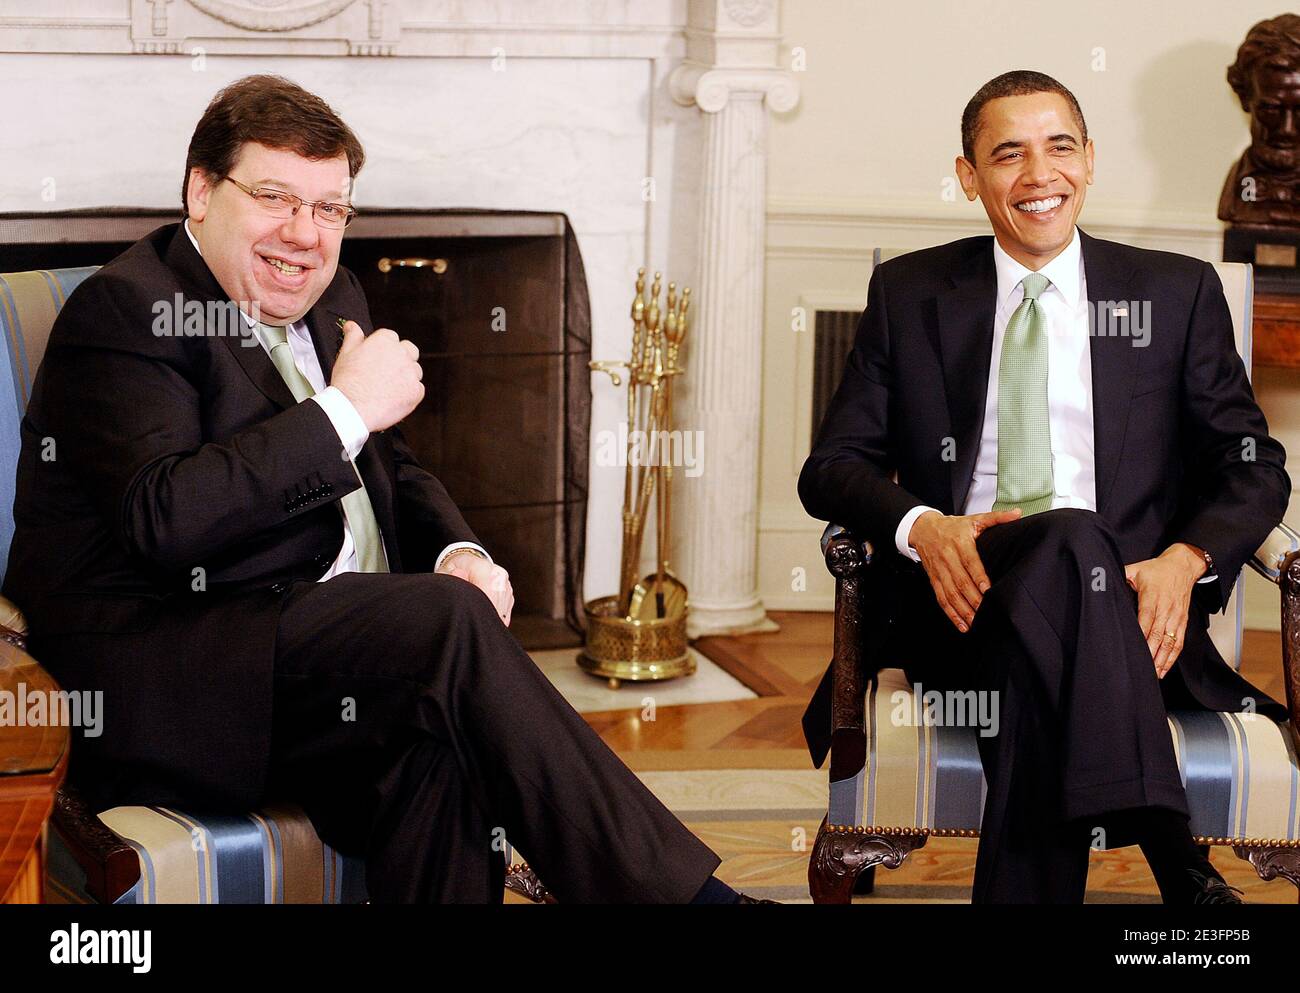 US President Barack Obama meets with Irish Taoiseach (Prime Minister) Brian Cowen in the Oval Ofice at the White House in Washington DC, USA on March 17, 2009. Photo by Olivier Douliery/ABACAPRESS.COM Stock Photo